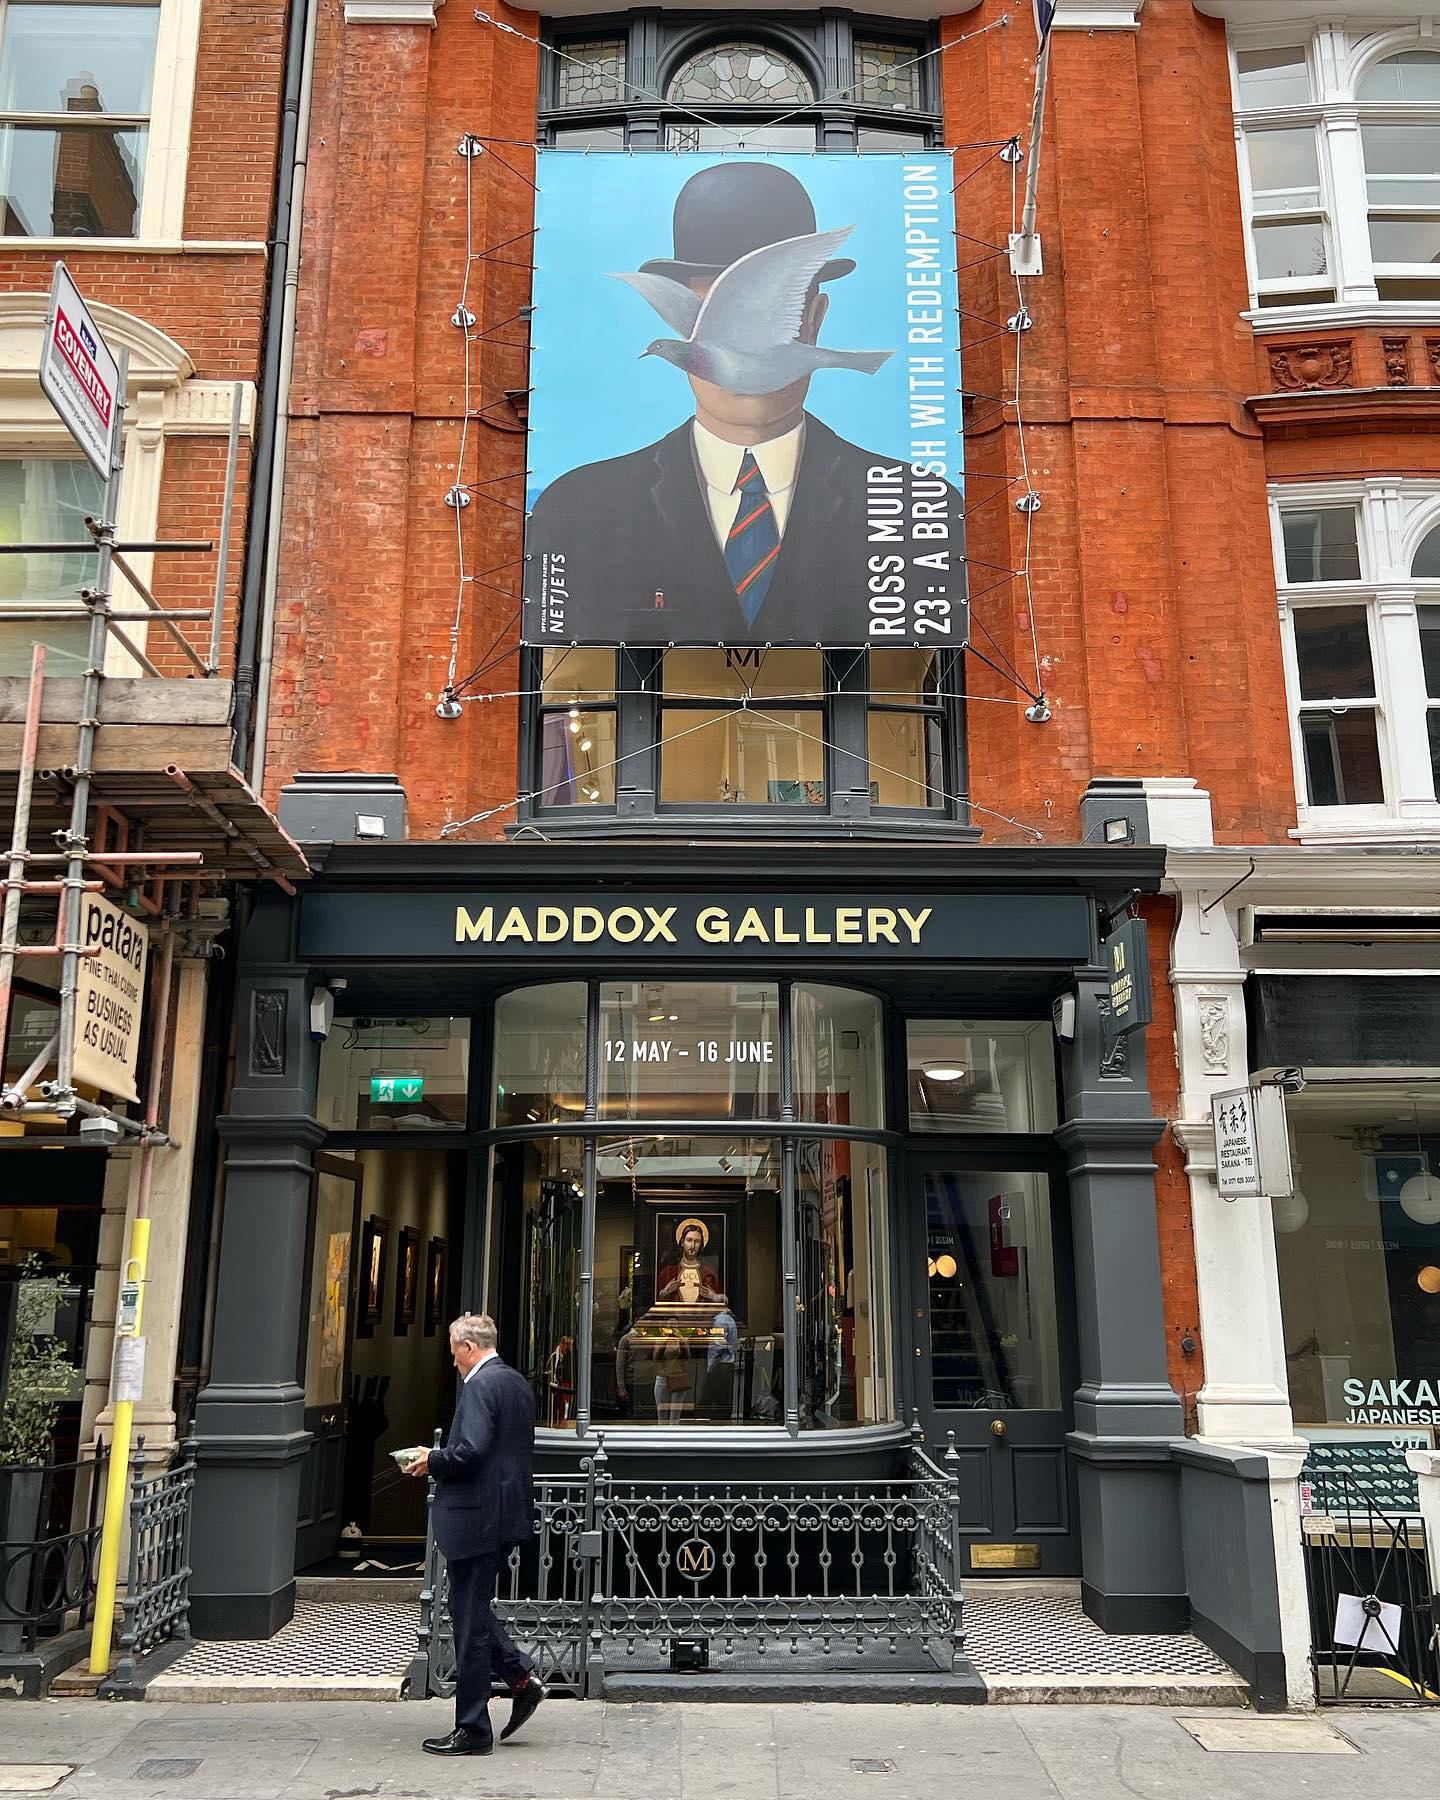 image  1 All Things England - Maddox Gallery #maddoxgallery is now well known for its jaw dropping displays w